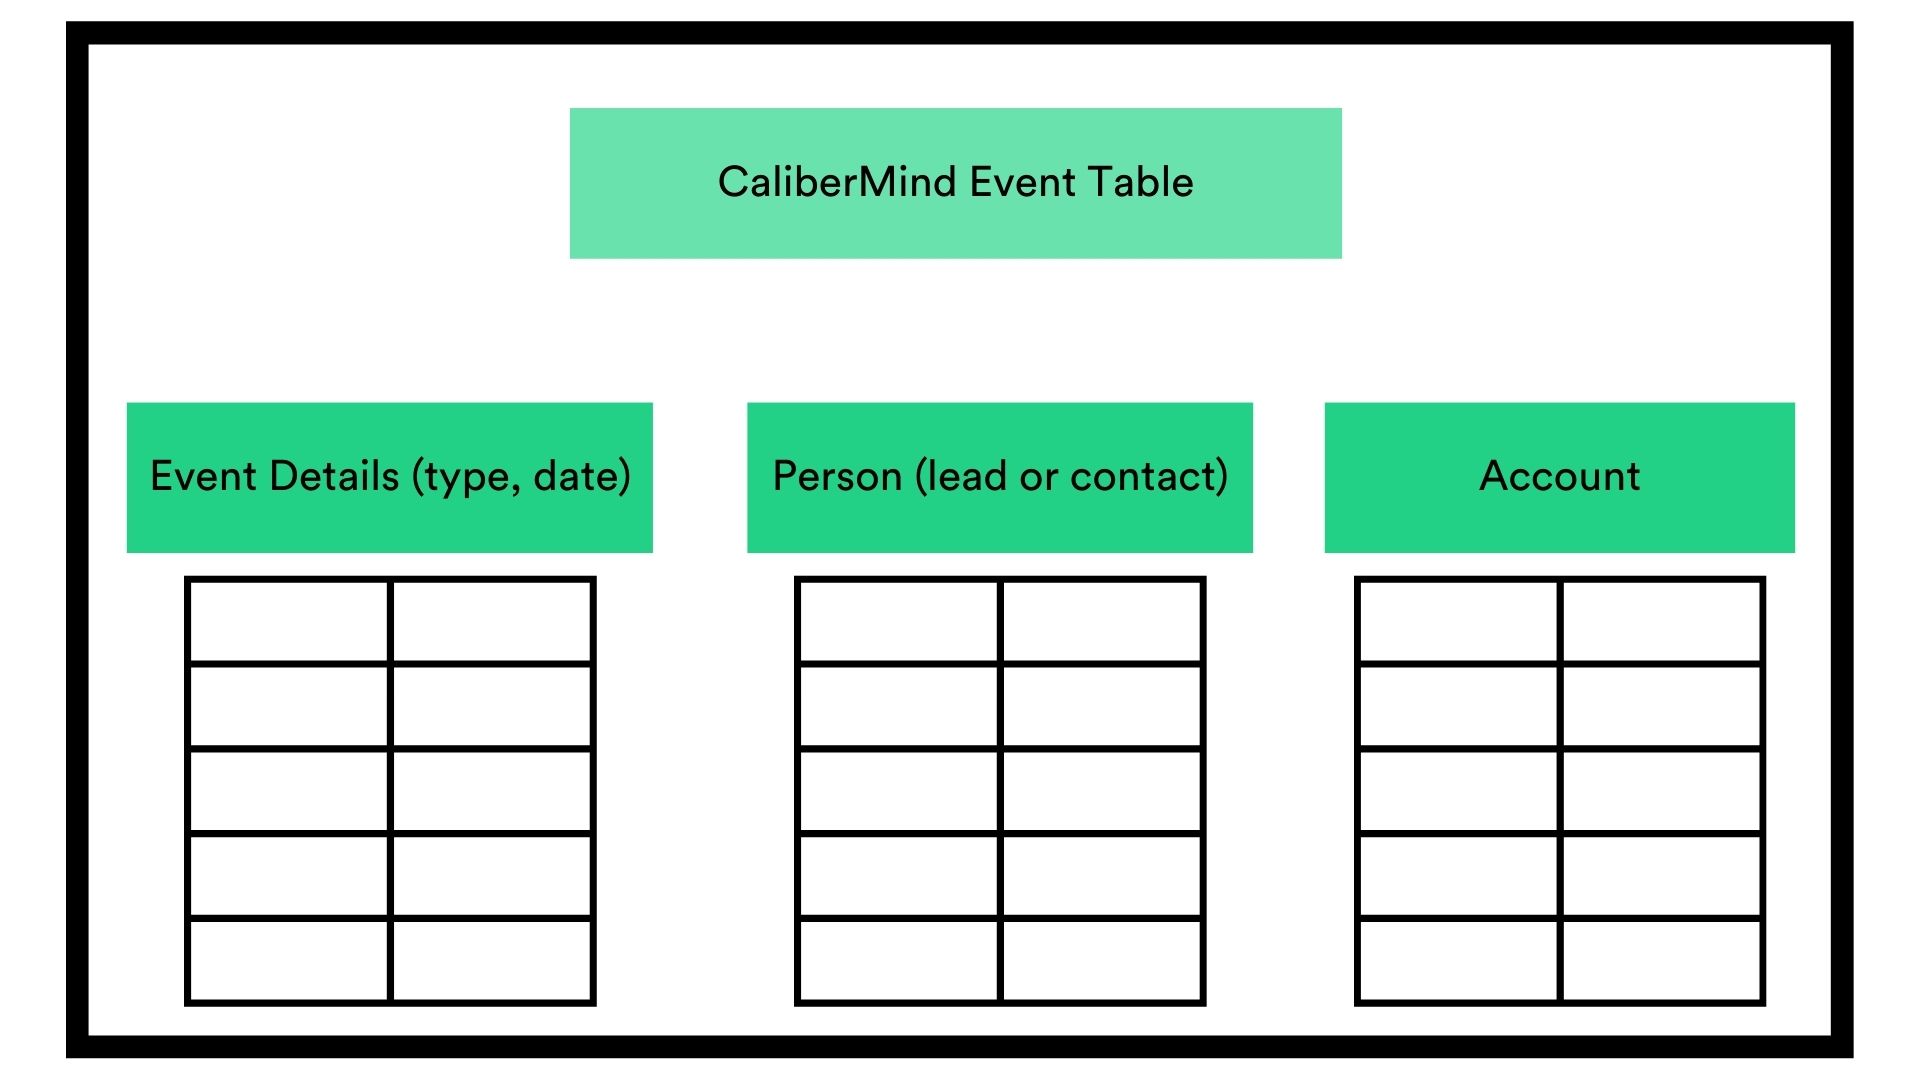 calibermind events link activities with account and contacts